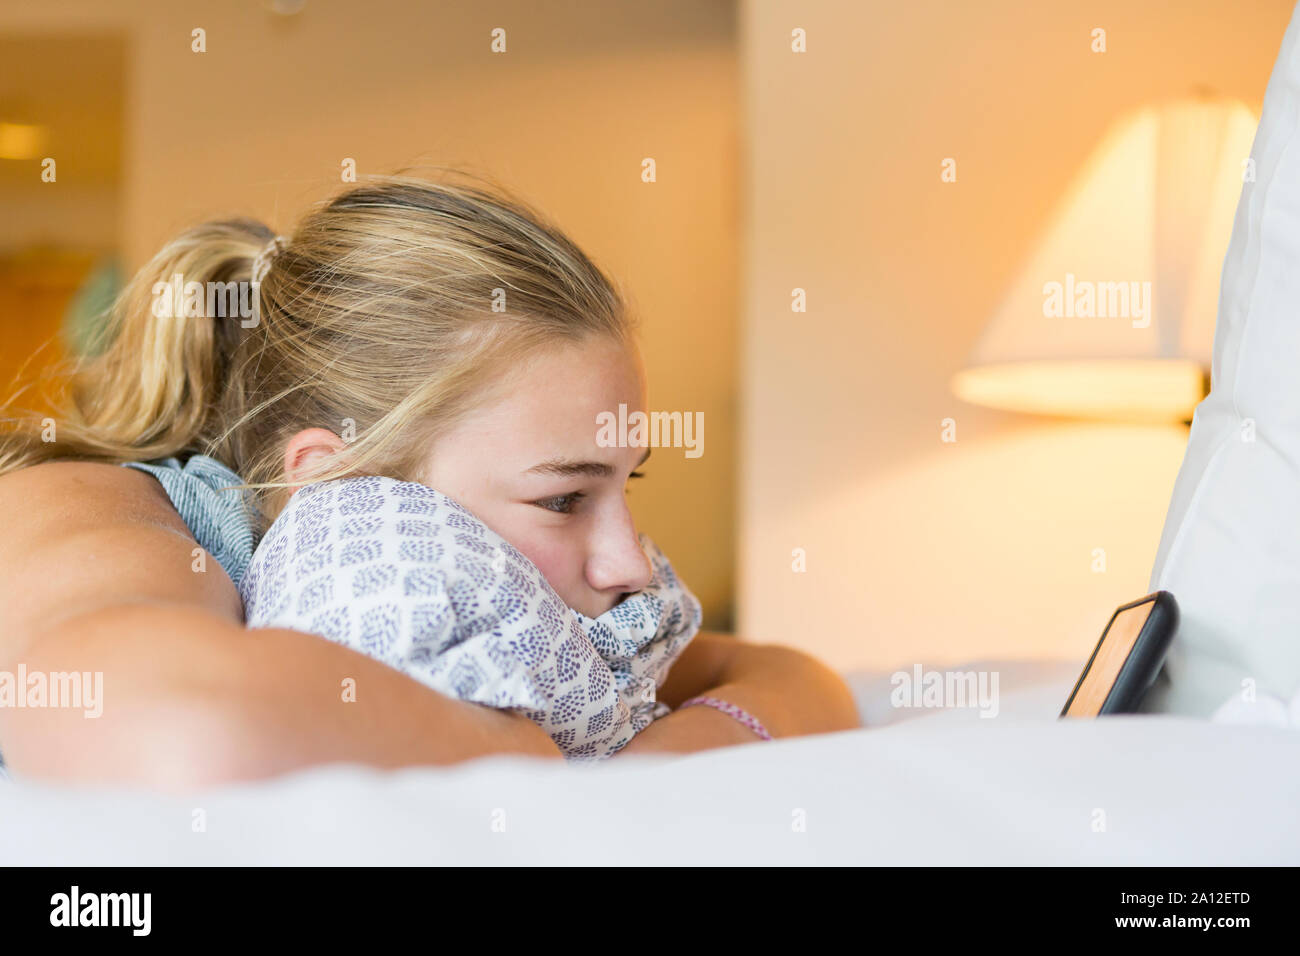 13 year old girl lying on chambre d'hôtel bed looking at smart phone Banque D'Images